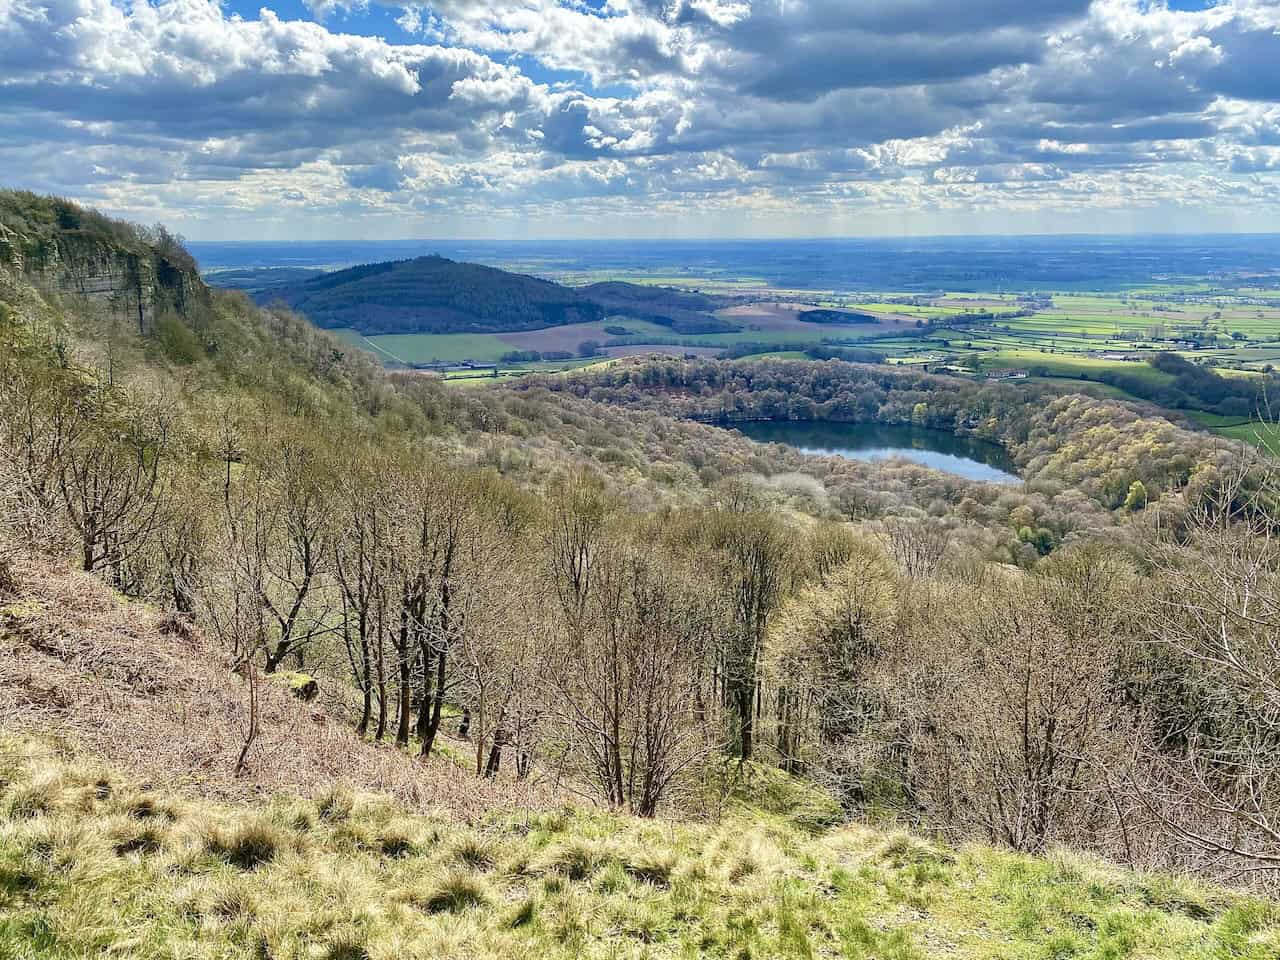 Amazing views of Gormire Lake and the sprawling flatland of the Vale of Mowbray, as seen from the Cleveland Way above Whitestone Cliff on the Gormire Lake walk.